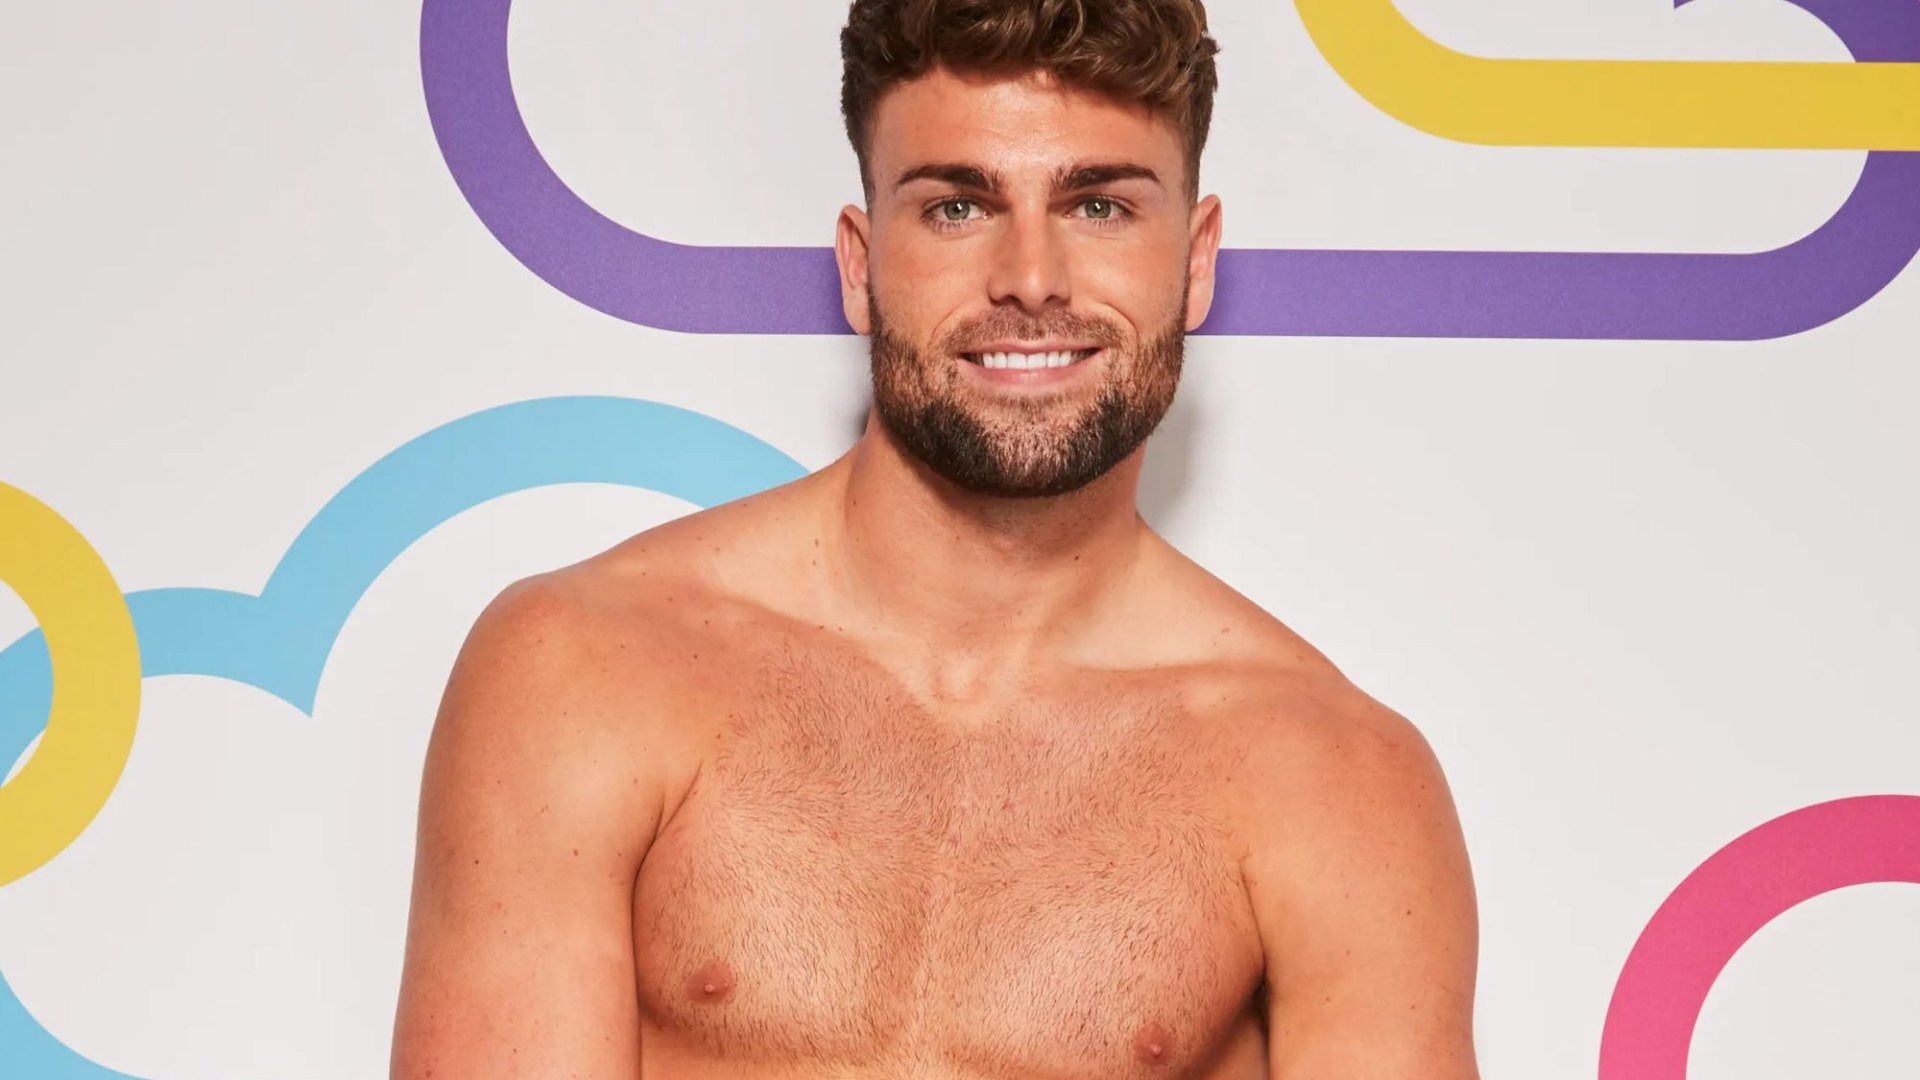 Love Island All Stars: Tom Clare drops major hint about his return to the show after talks